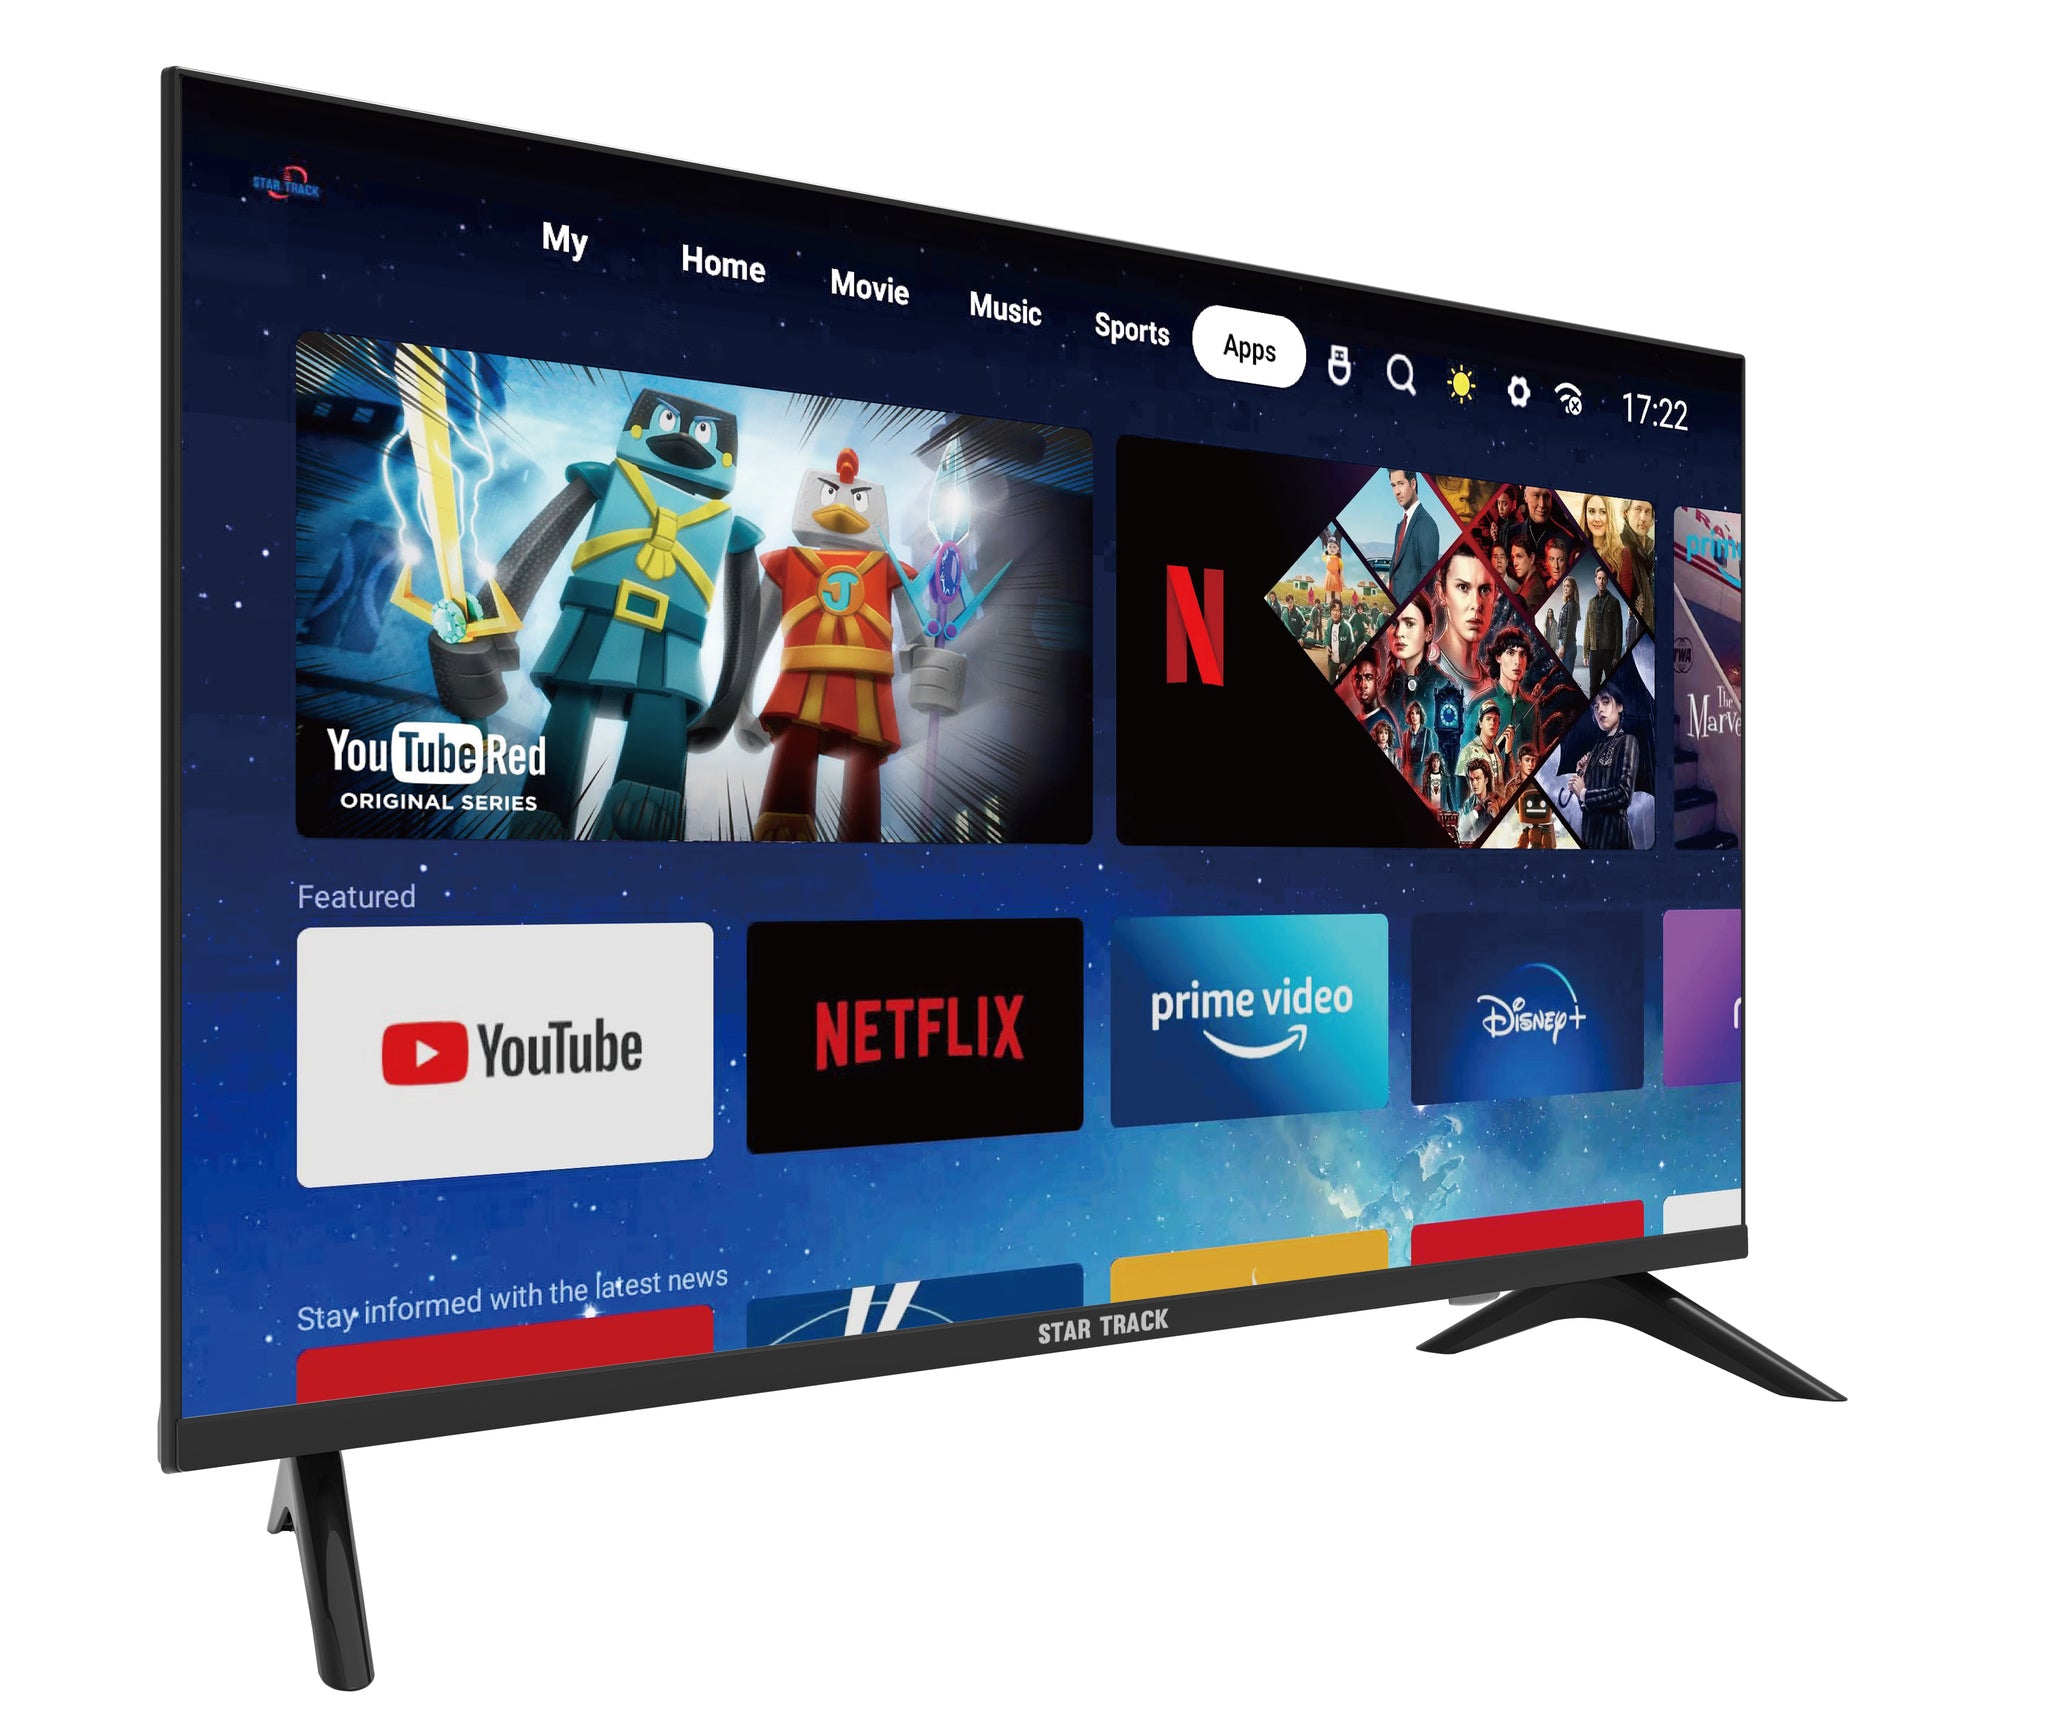 Star Track LED Smart TV Android 11.0  T2S2  A+ Screen, Wifi, MIRACAST, Netflix, YouTube, Prime Video, HDMI, USB